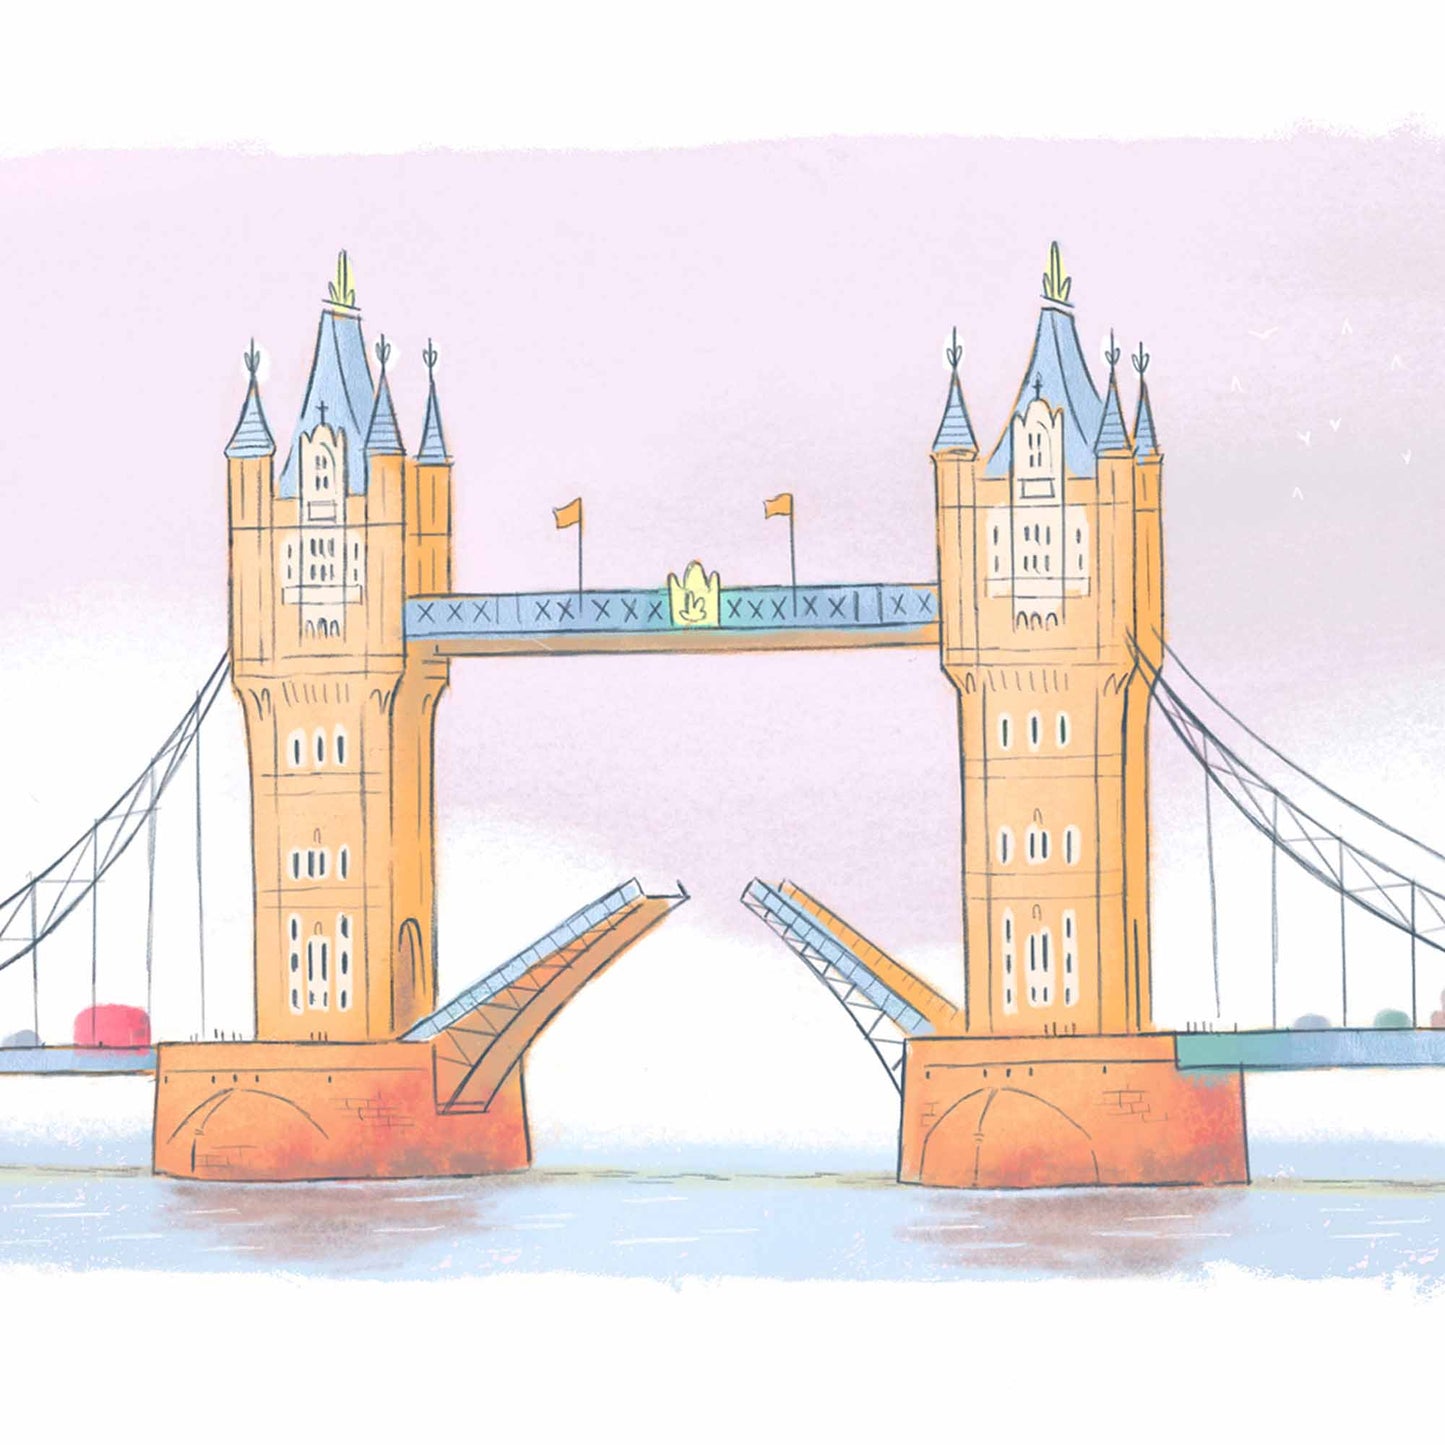 A print of London's Tower Bridge beautifully illustrated by Mike Green.